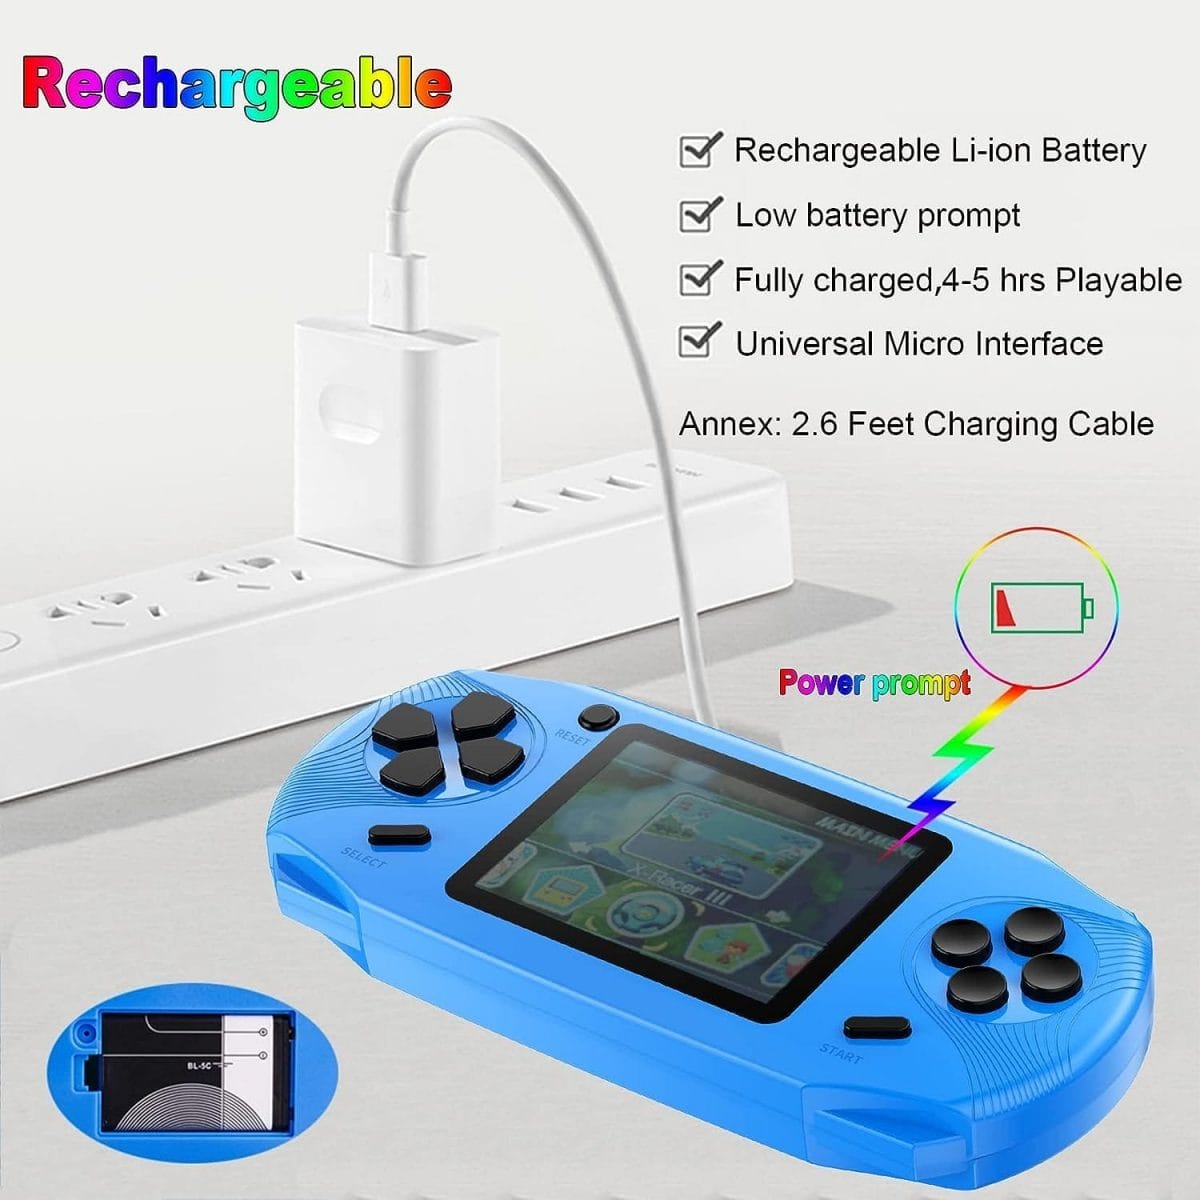 Beijue 16 Bit Handheld Games for Kids Adults 3.0 Large Screen Preloaded 100 HD Classic Retro Video Games USB Rechargeable Seniors Electronic Game Player Birthday Xmas Present (Blue)